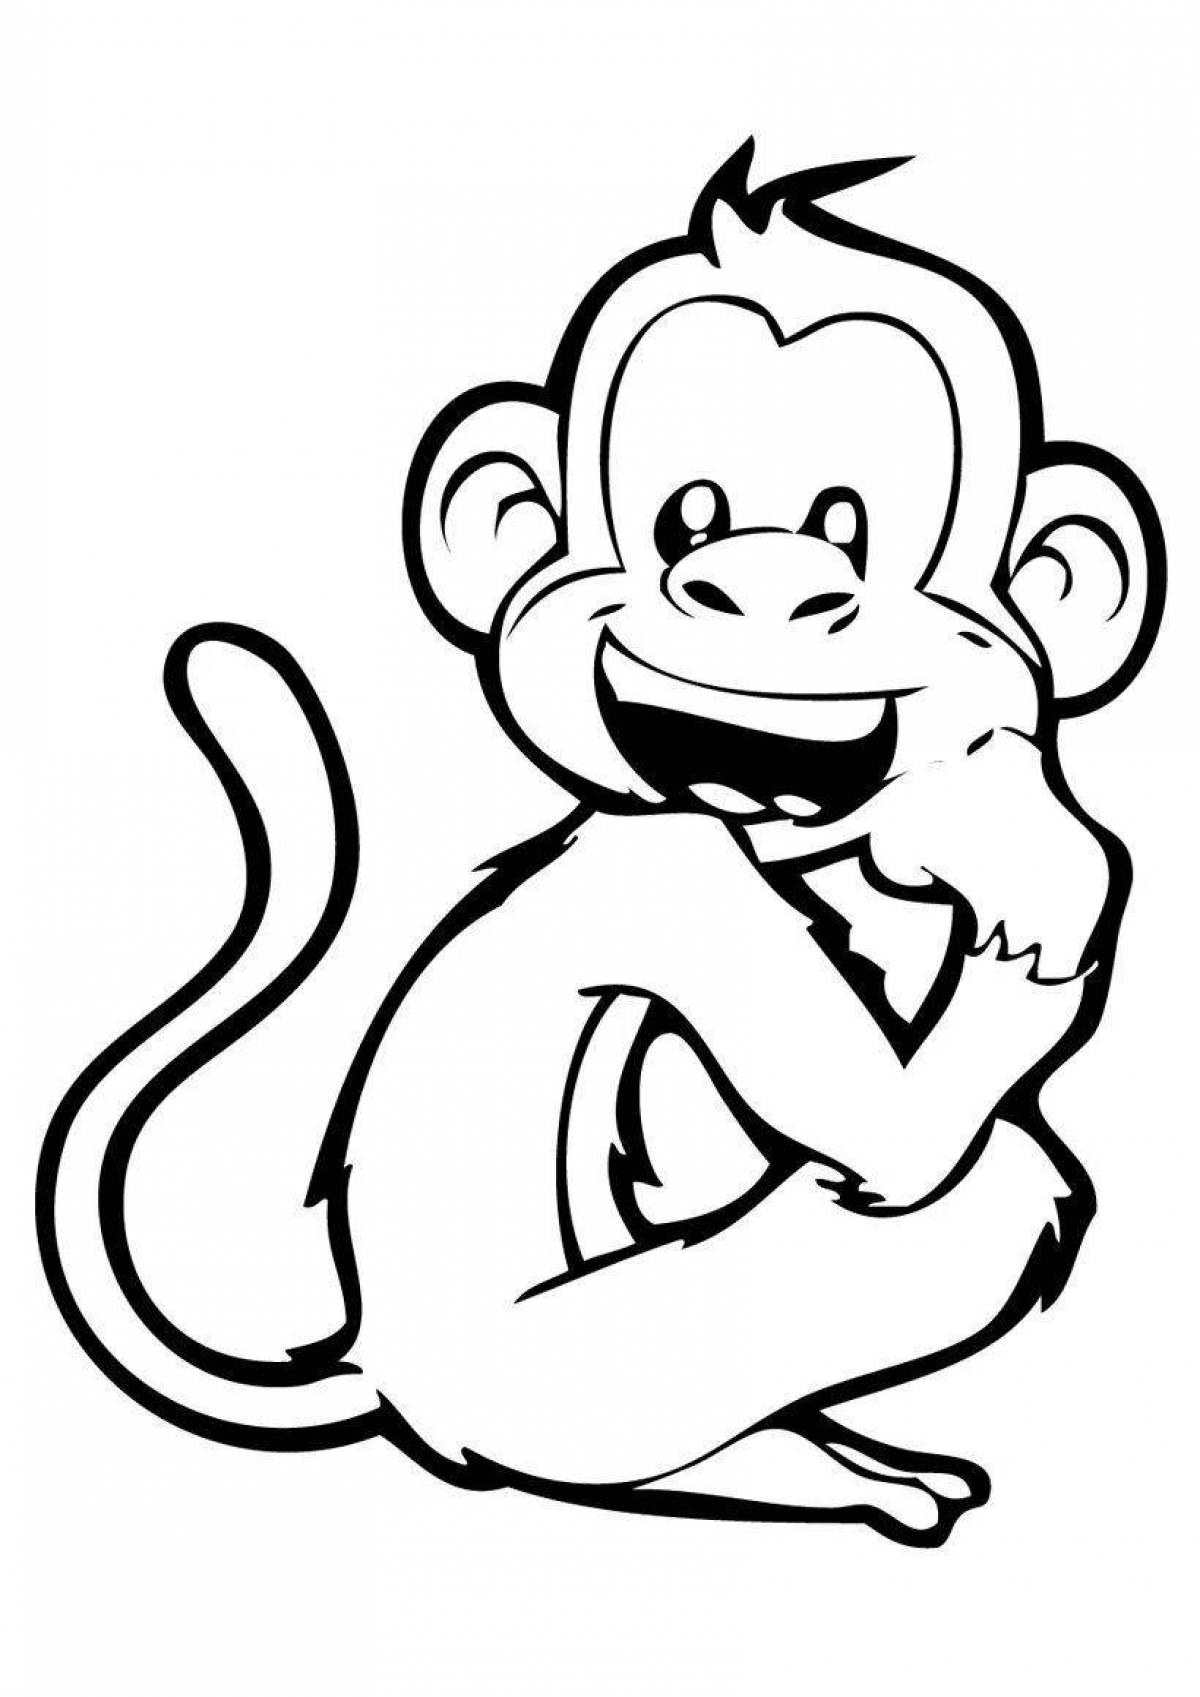 Glitter monkey coloring book for kids